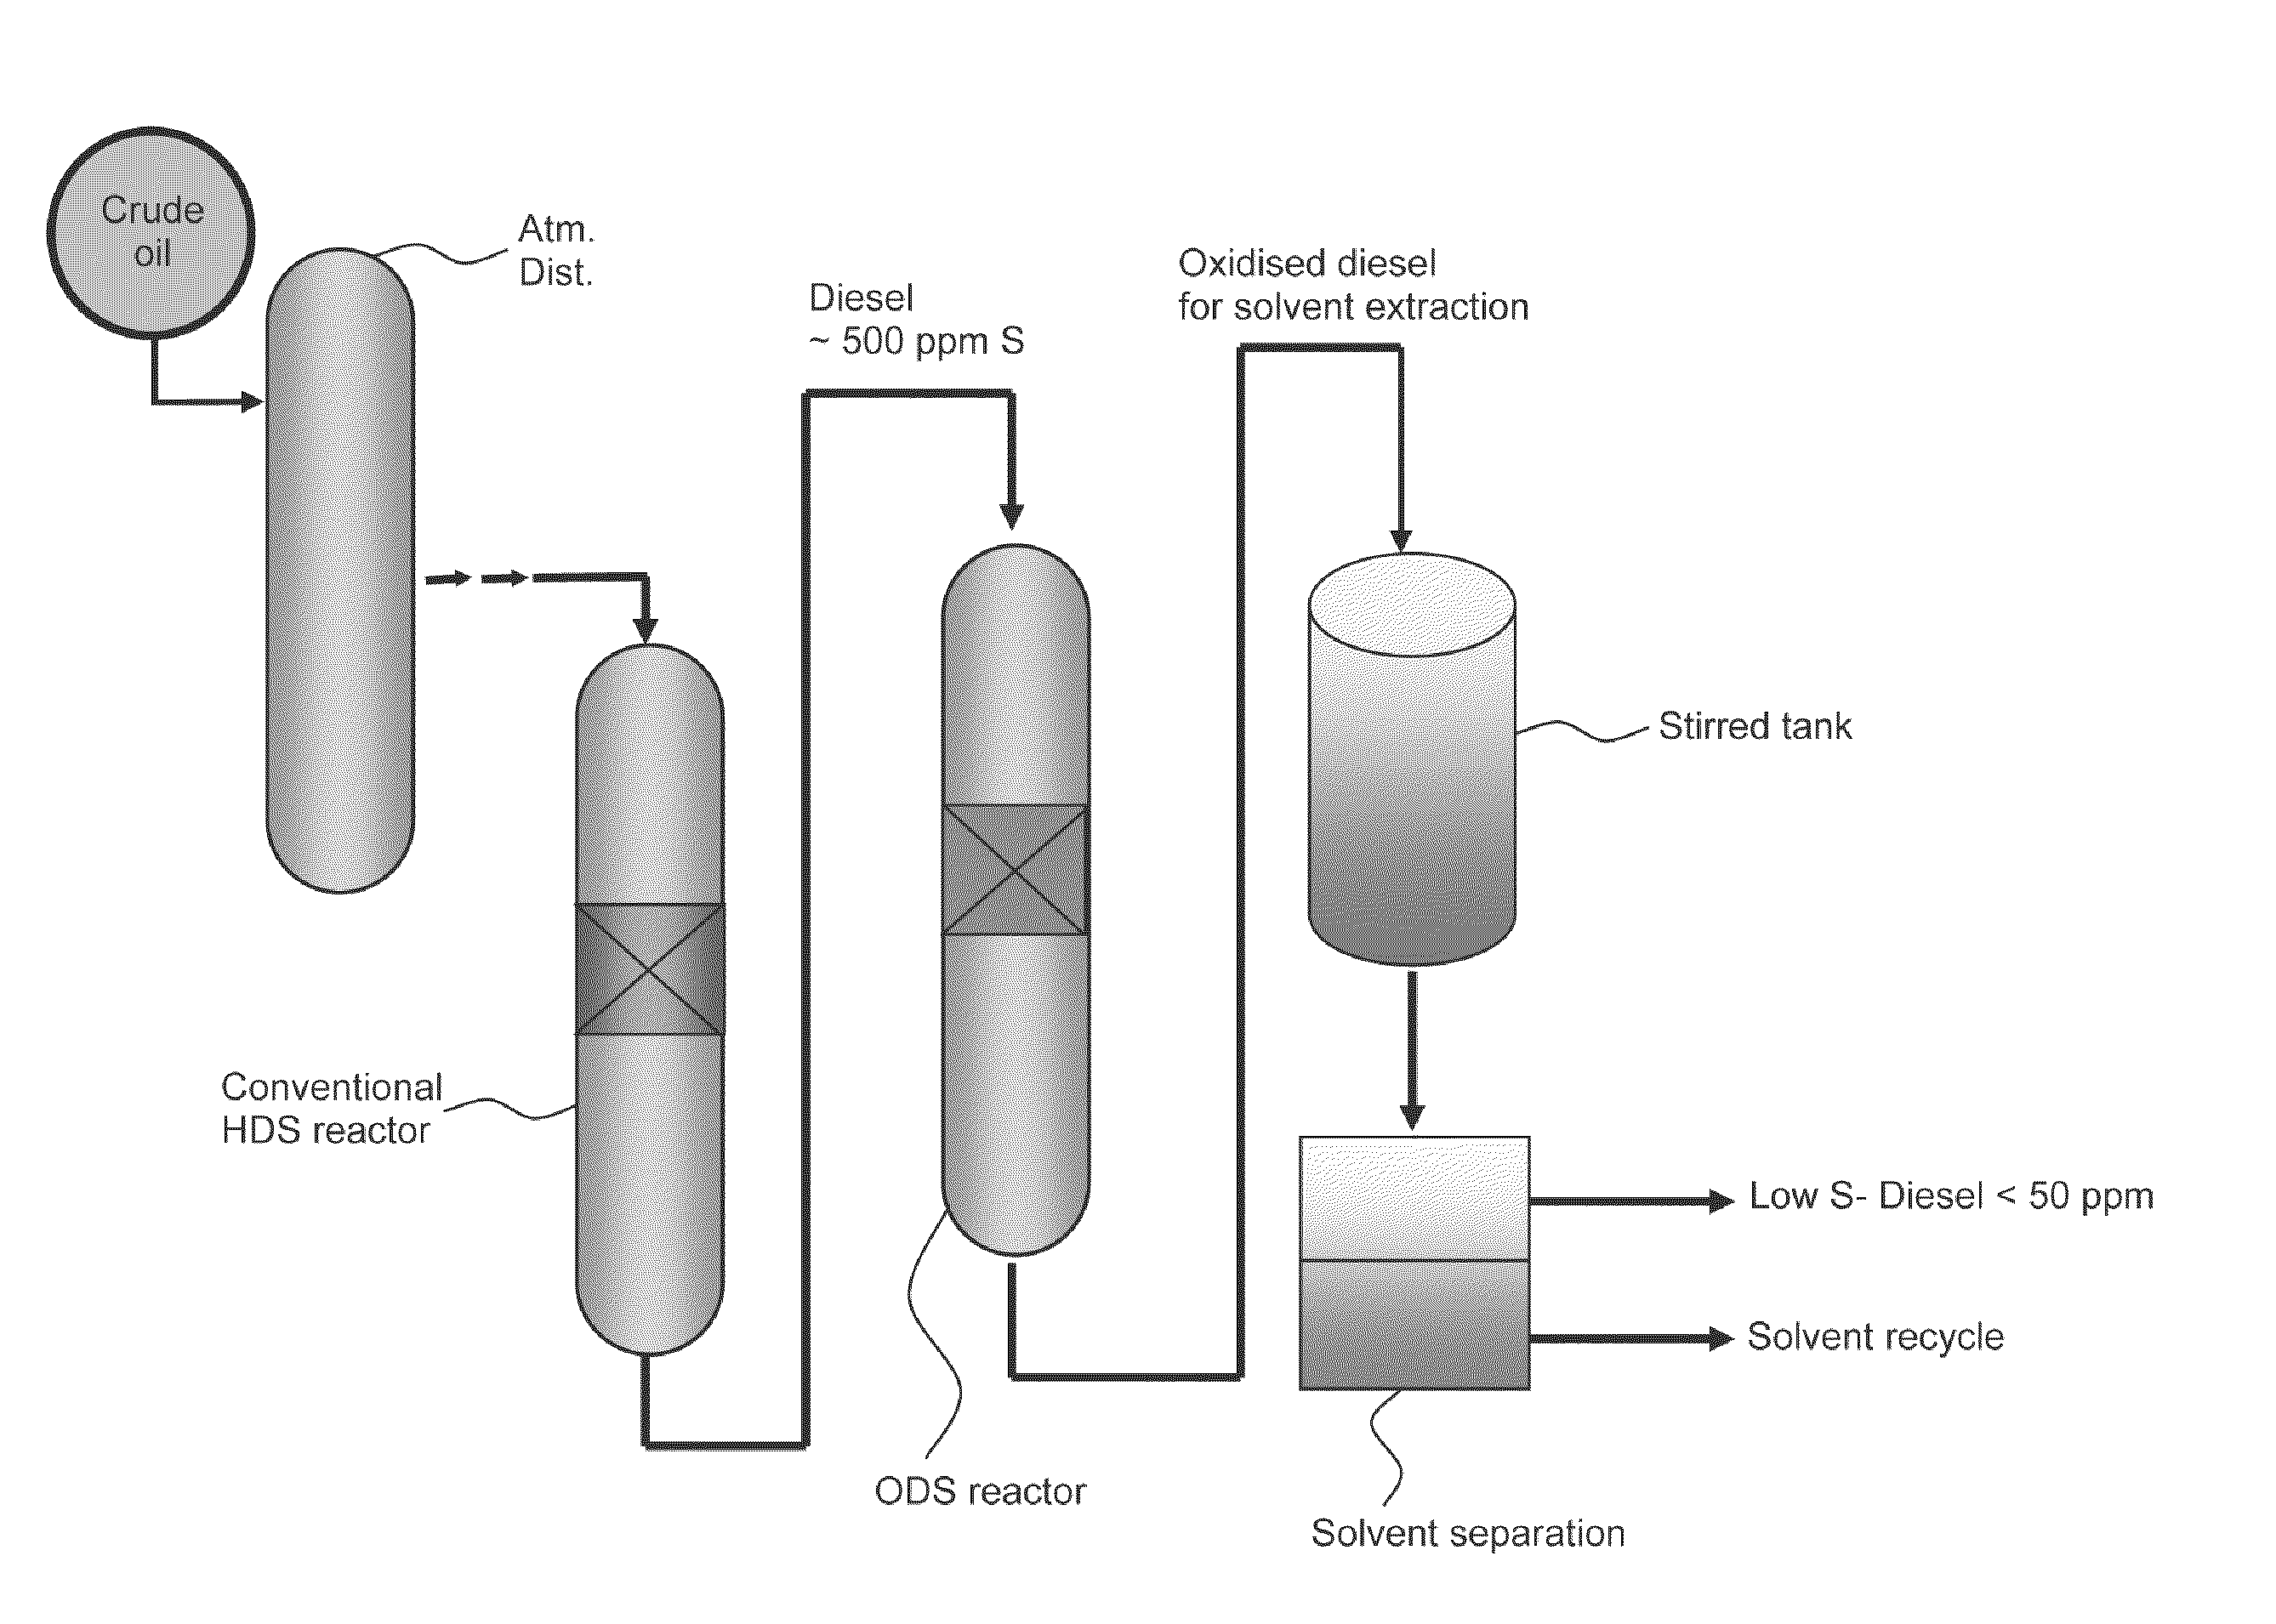 Novel process for removing sulfur from fuels